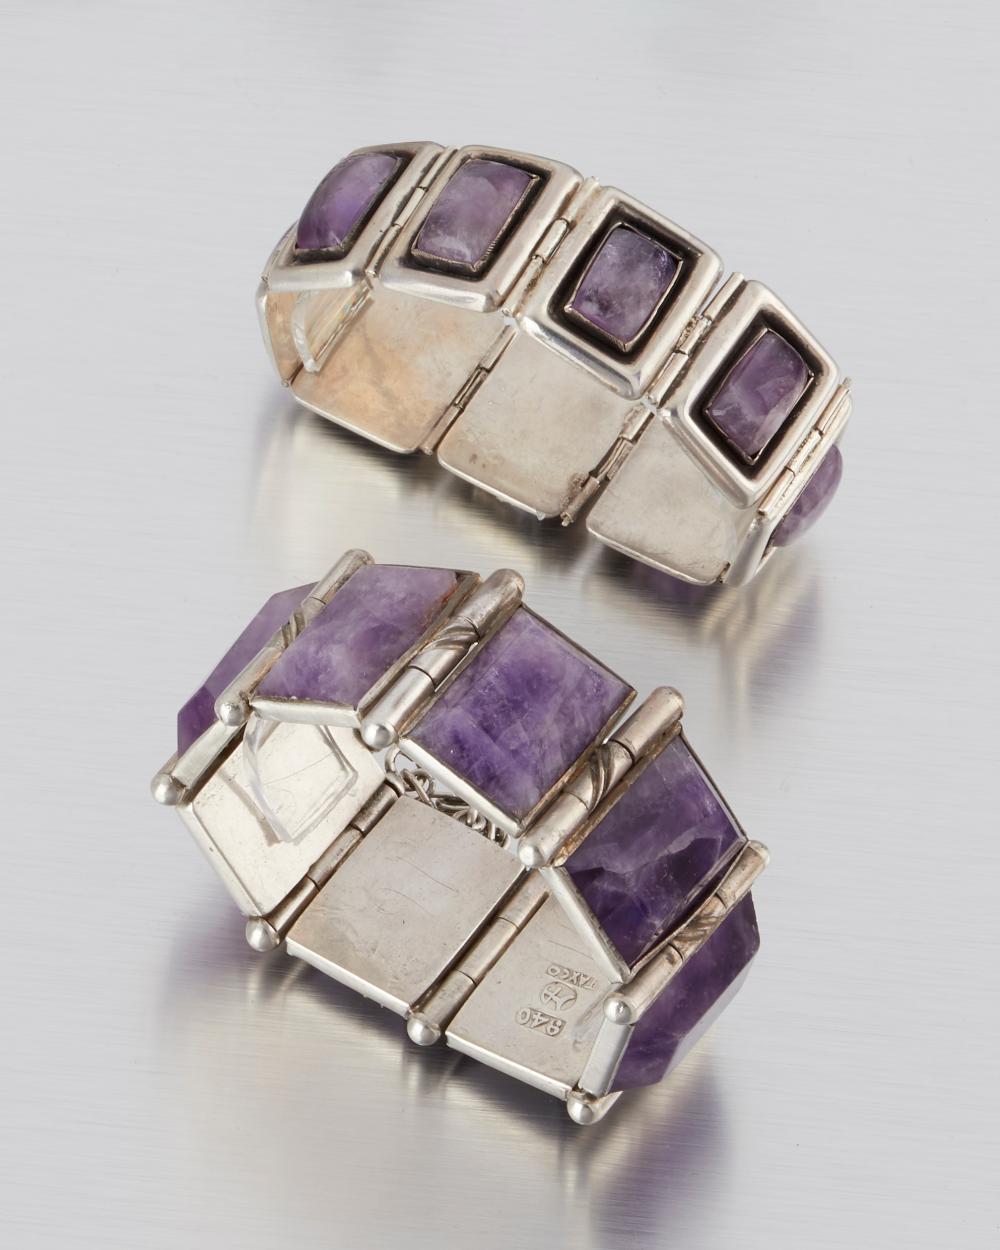 TWO HECTOR AGUILAR SILVER AND AMETHYST